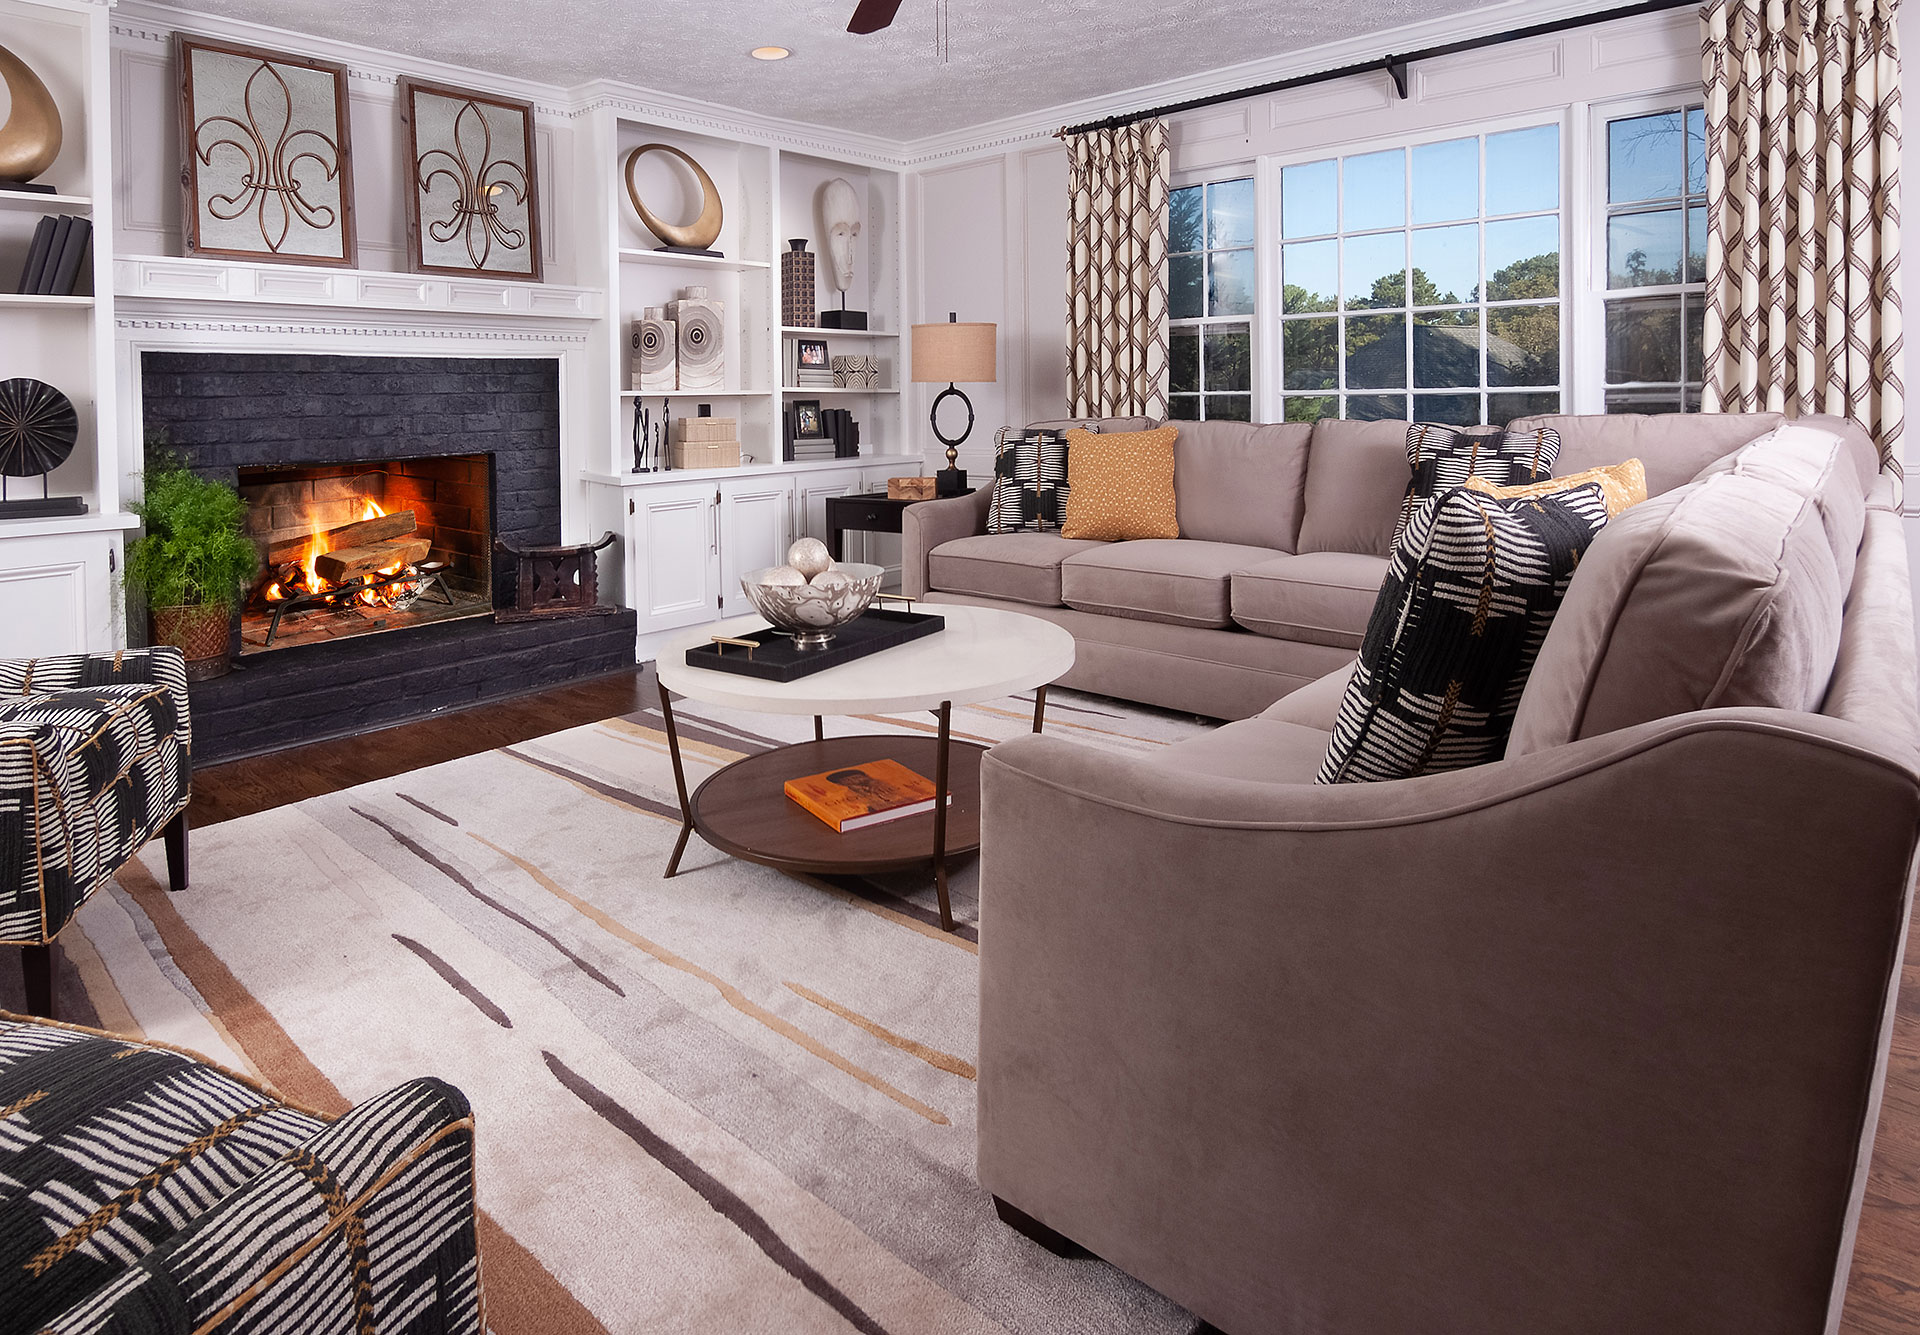 Seasonal transition tips: How to transform your living room from a summer to fall feel